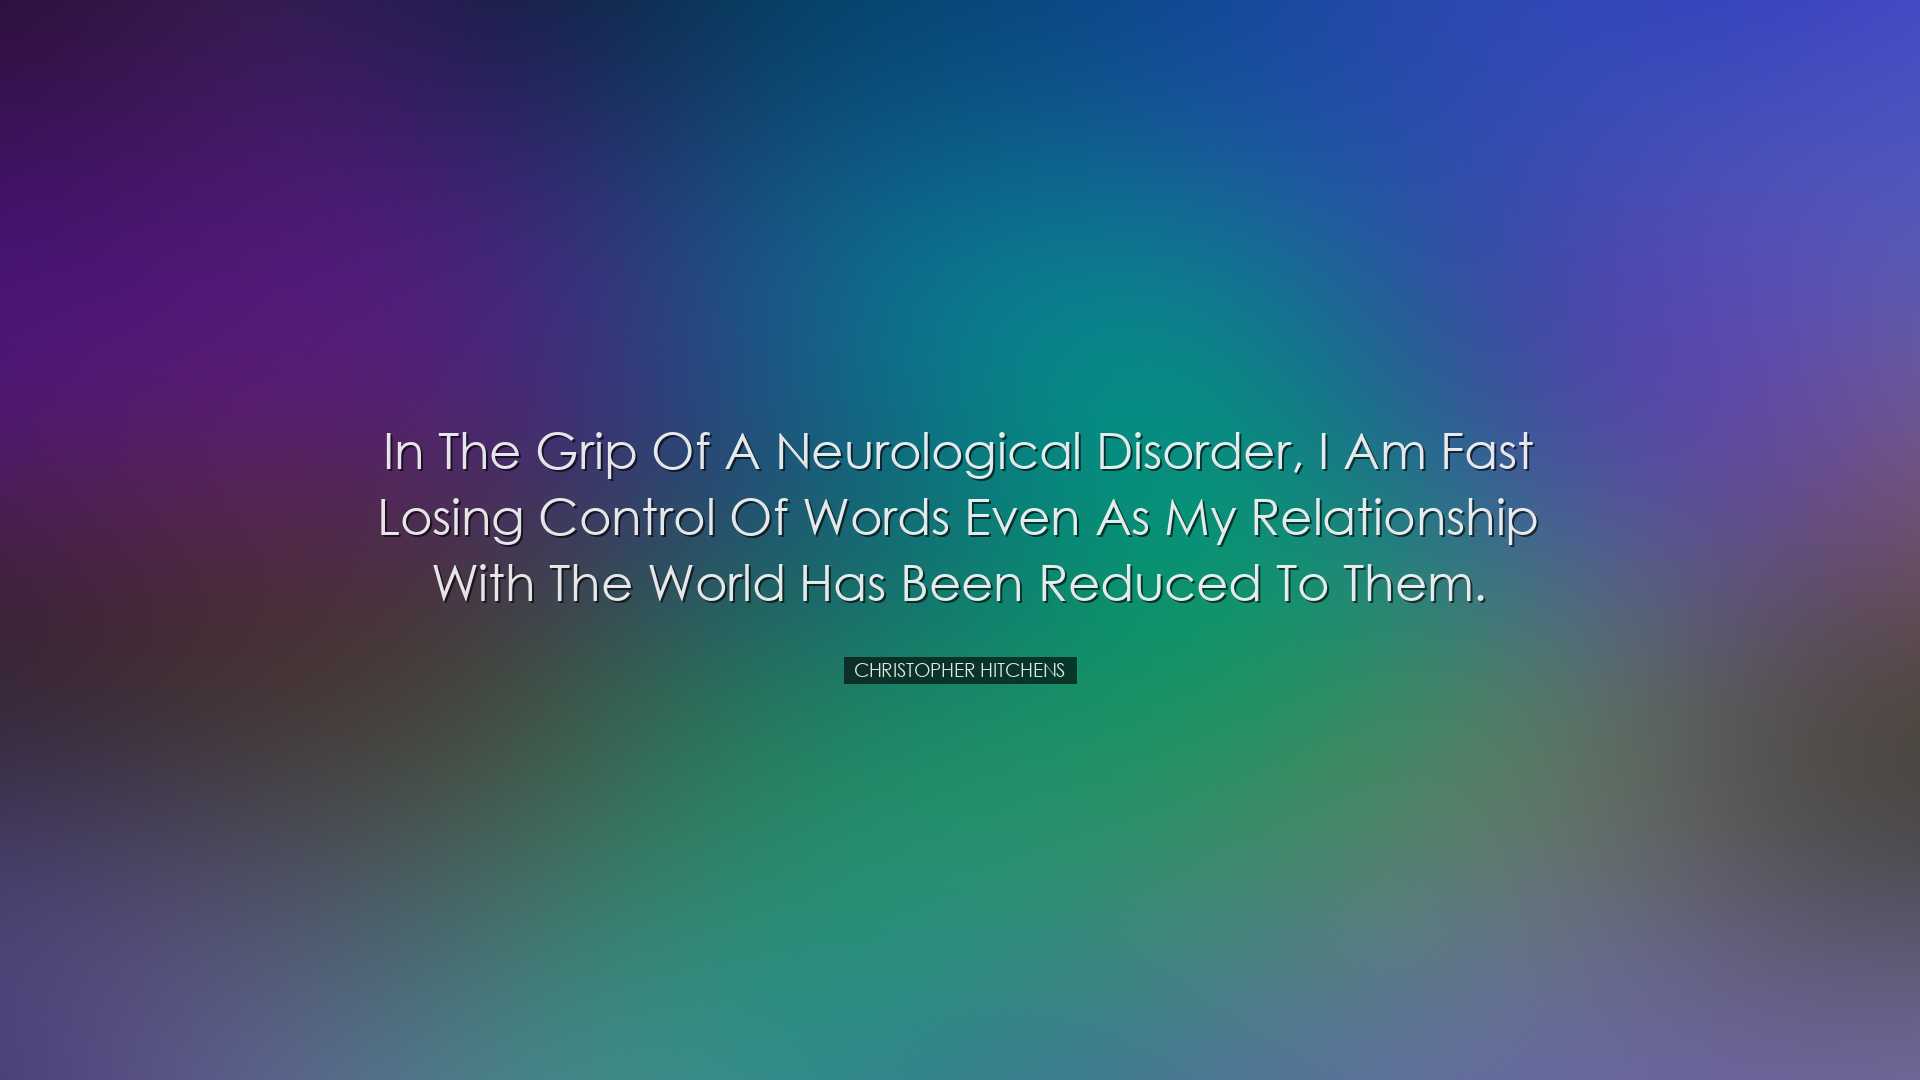 In the grip of a neurological disorder, I am fast losing control o